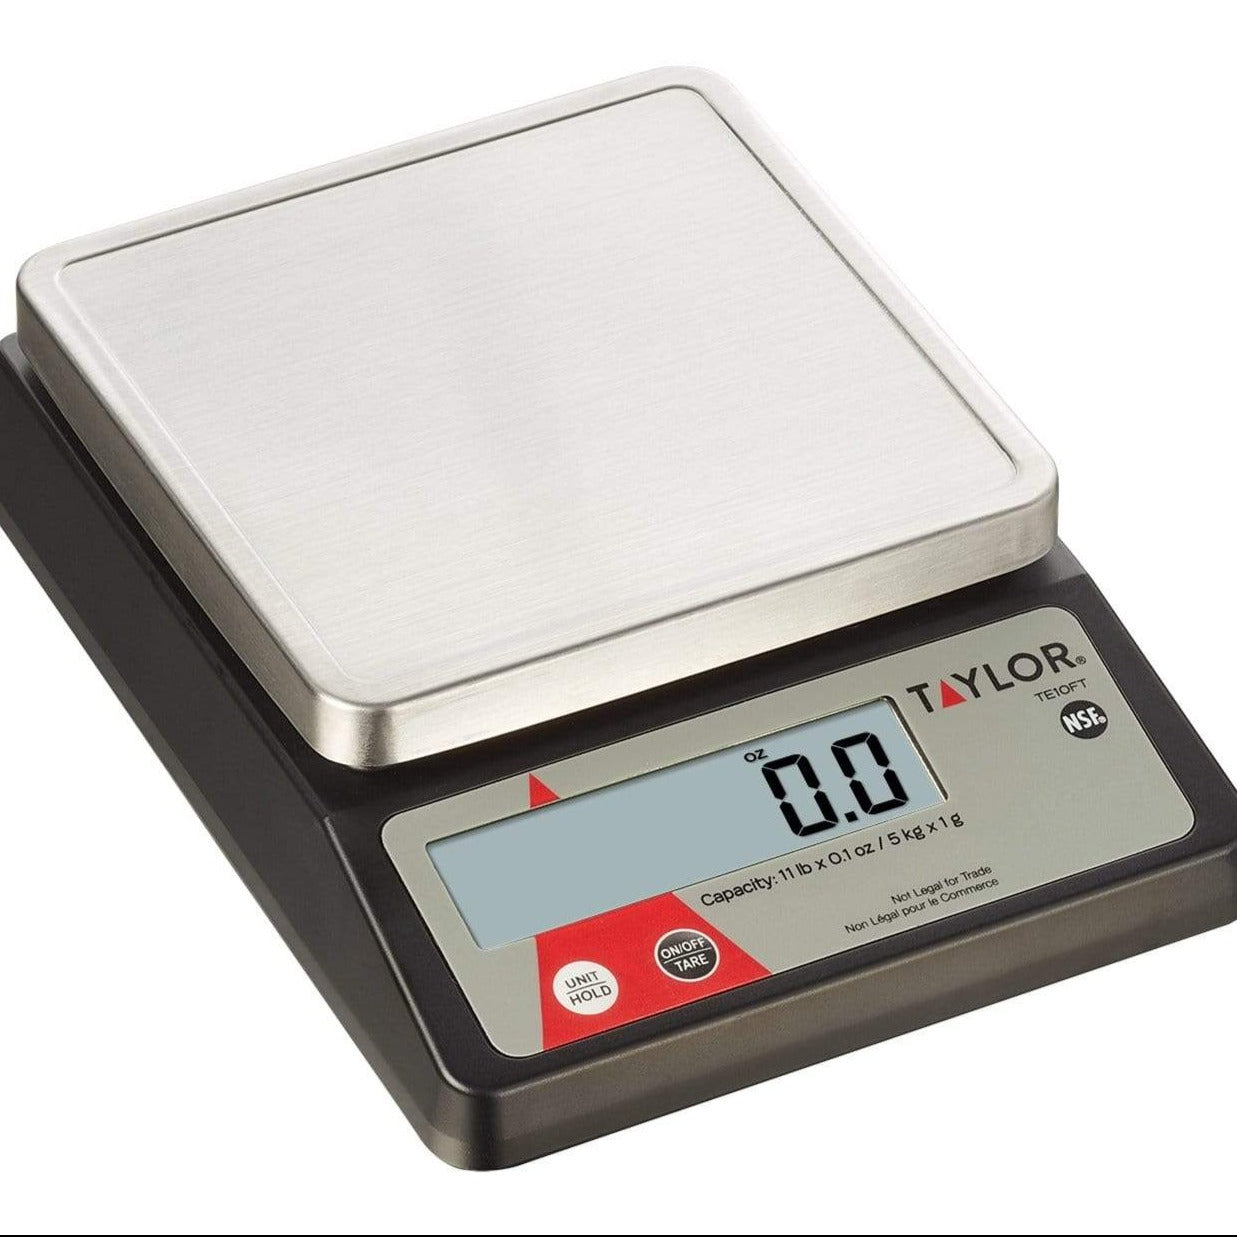 Digital Kitchen Food Scale LCD Display Weight in Grams Kilograms Ounces